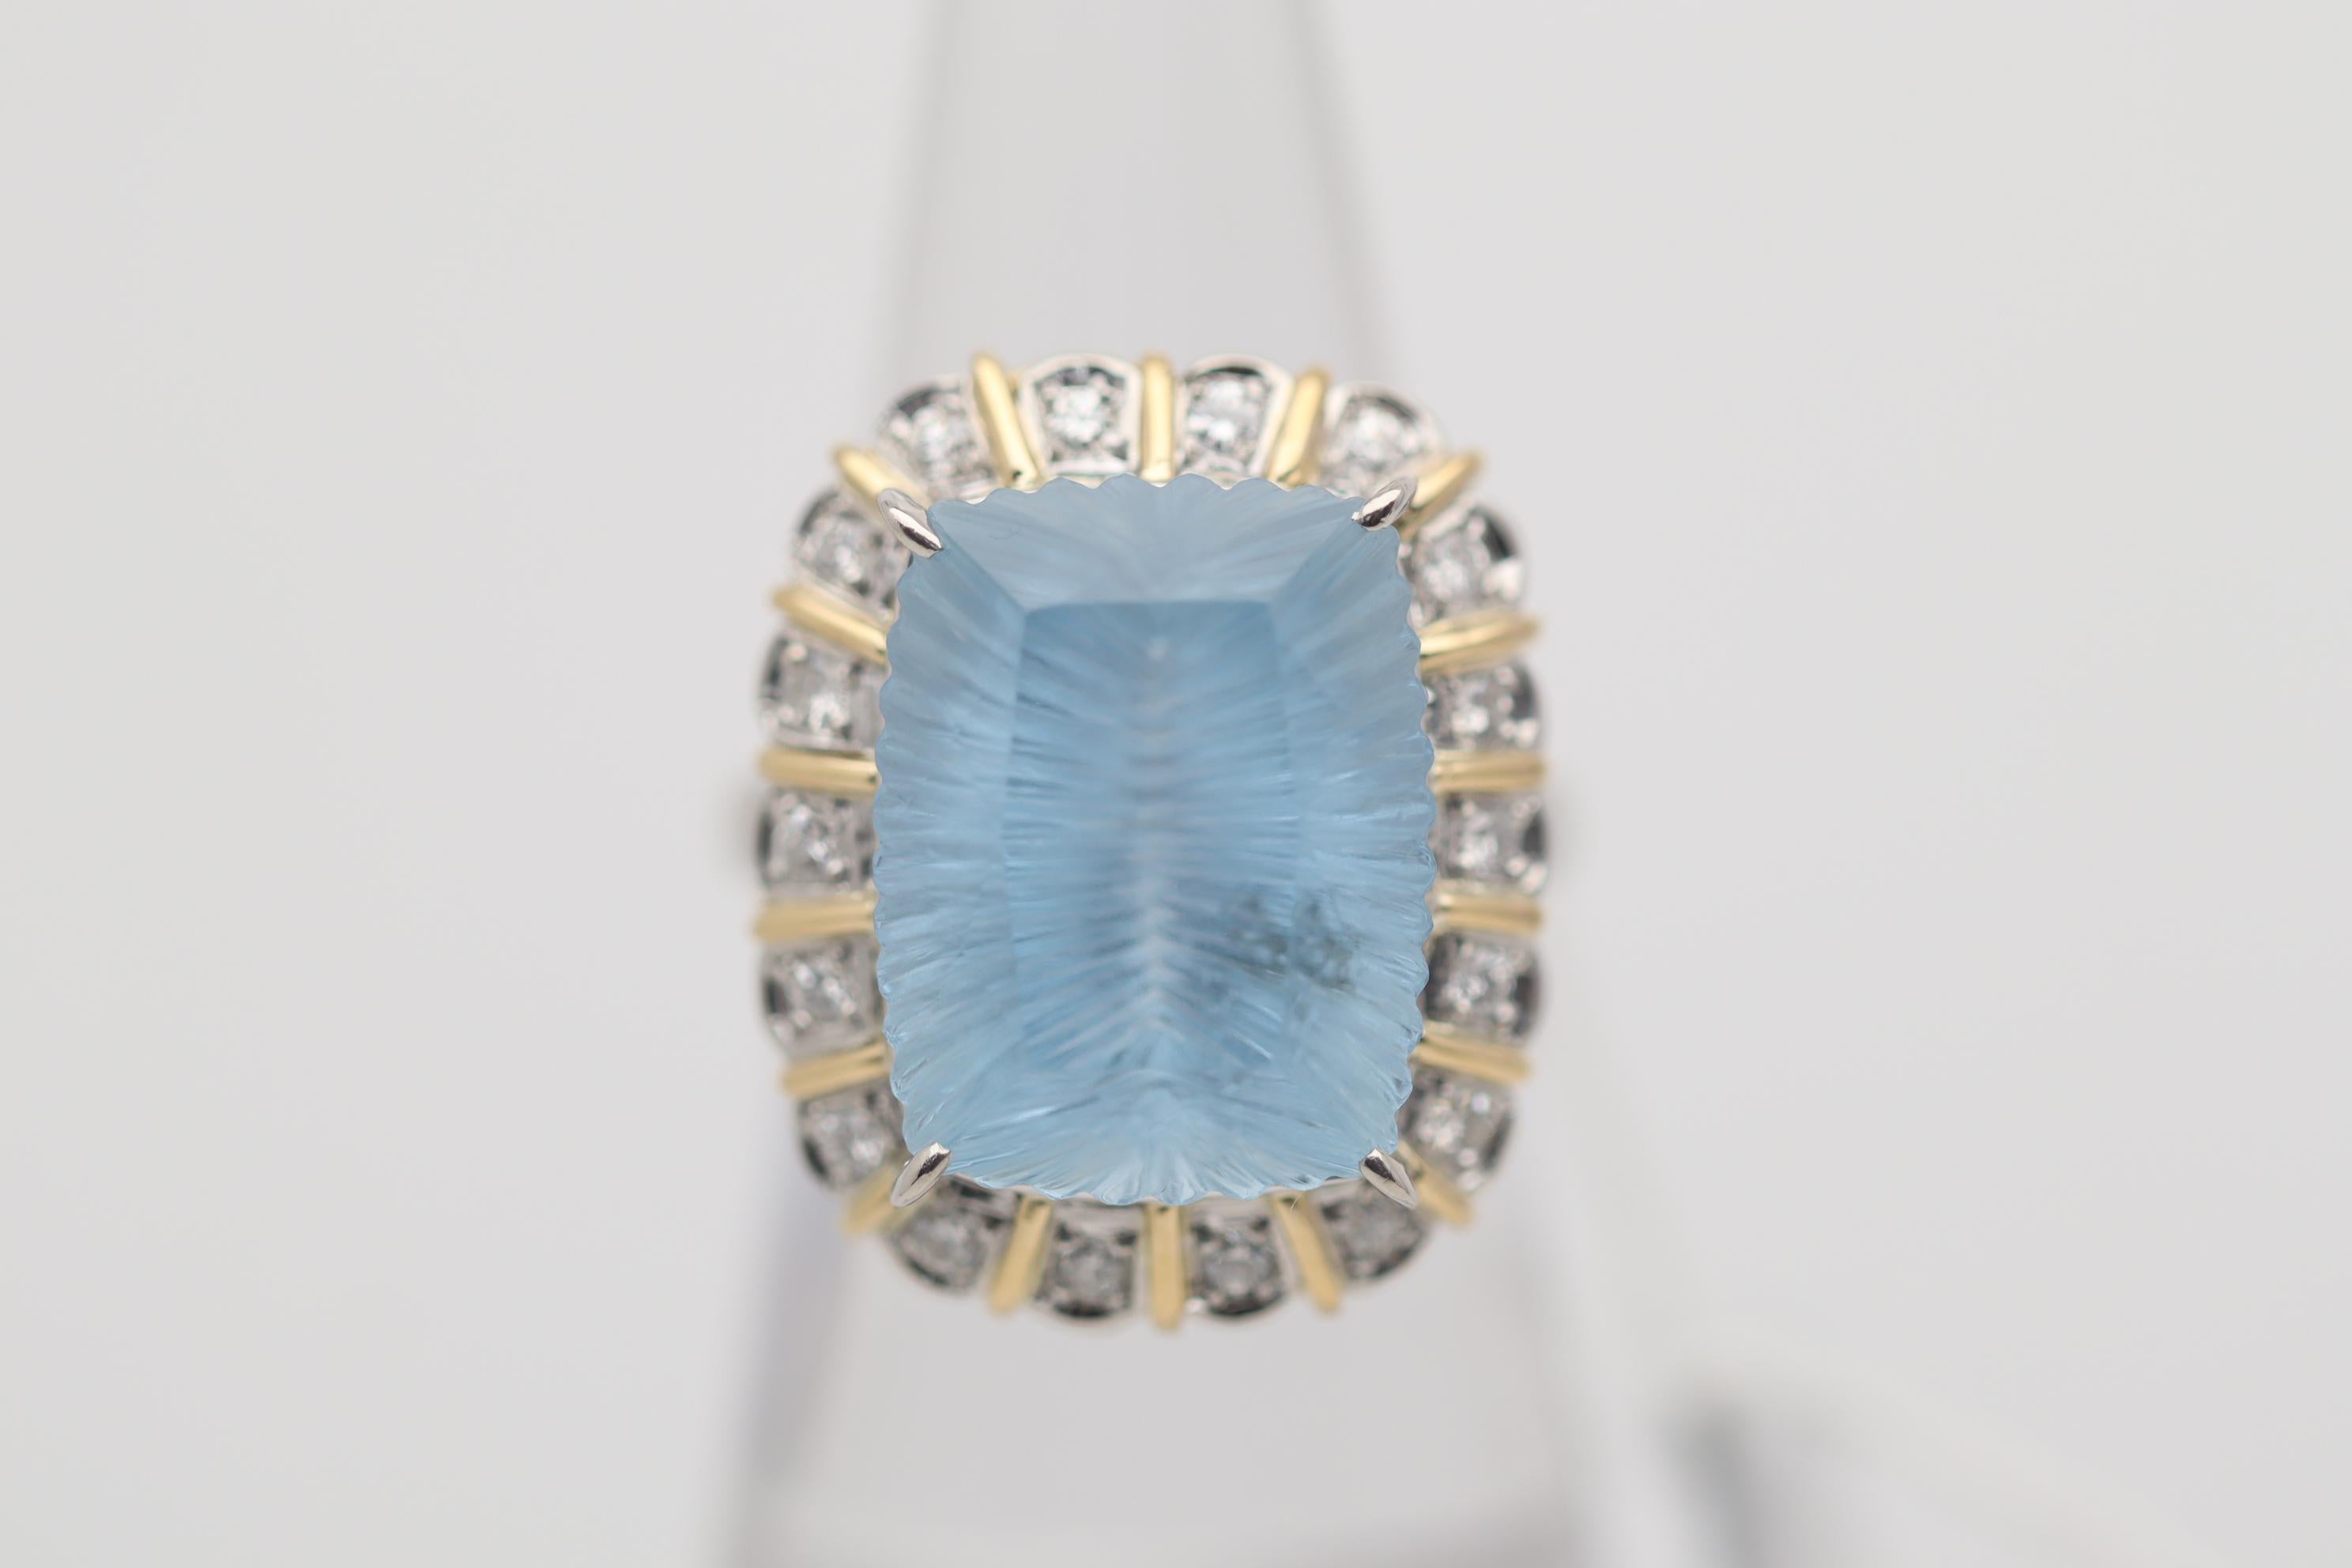 A unique and stylish ring featuring a 11.52 carat aquamarine with a high precision fantasy-cut. While the crown of the aquamarine is a traditional brilliant-cut the pavilion (bottom half) of the stone is a unique fantasy-cut which gives the stone a